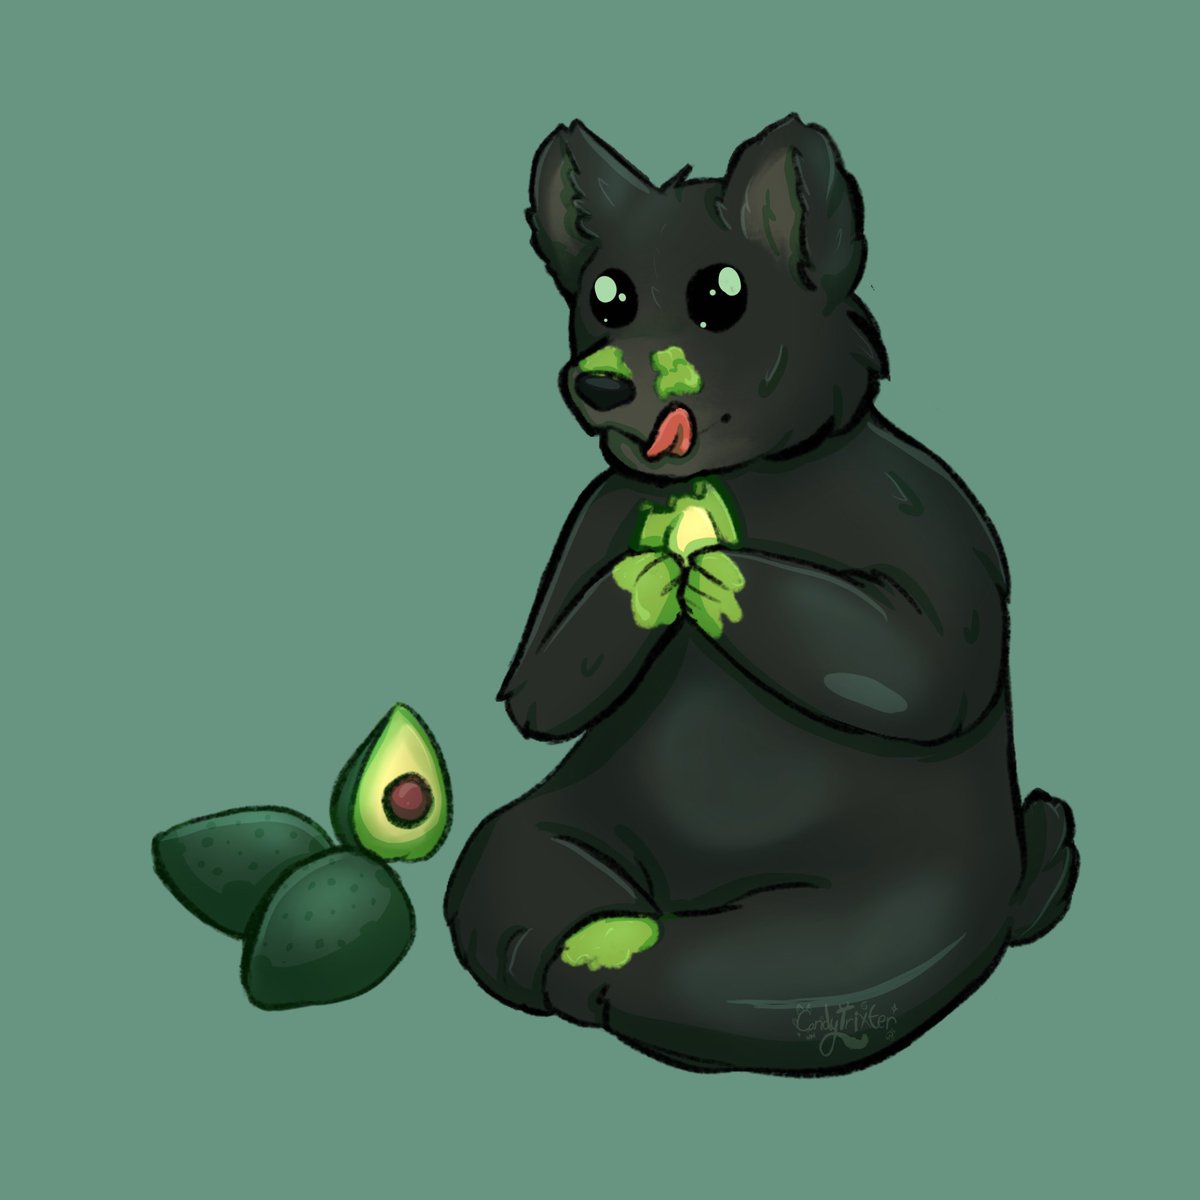 @ZooTampa I went to this zoo on my little vacation and I loved it! I saw Newberry doing tricks. Her favorite fruit 🥑 so I drew Newberry as a avocado black bear!